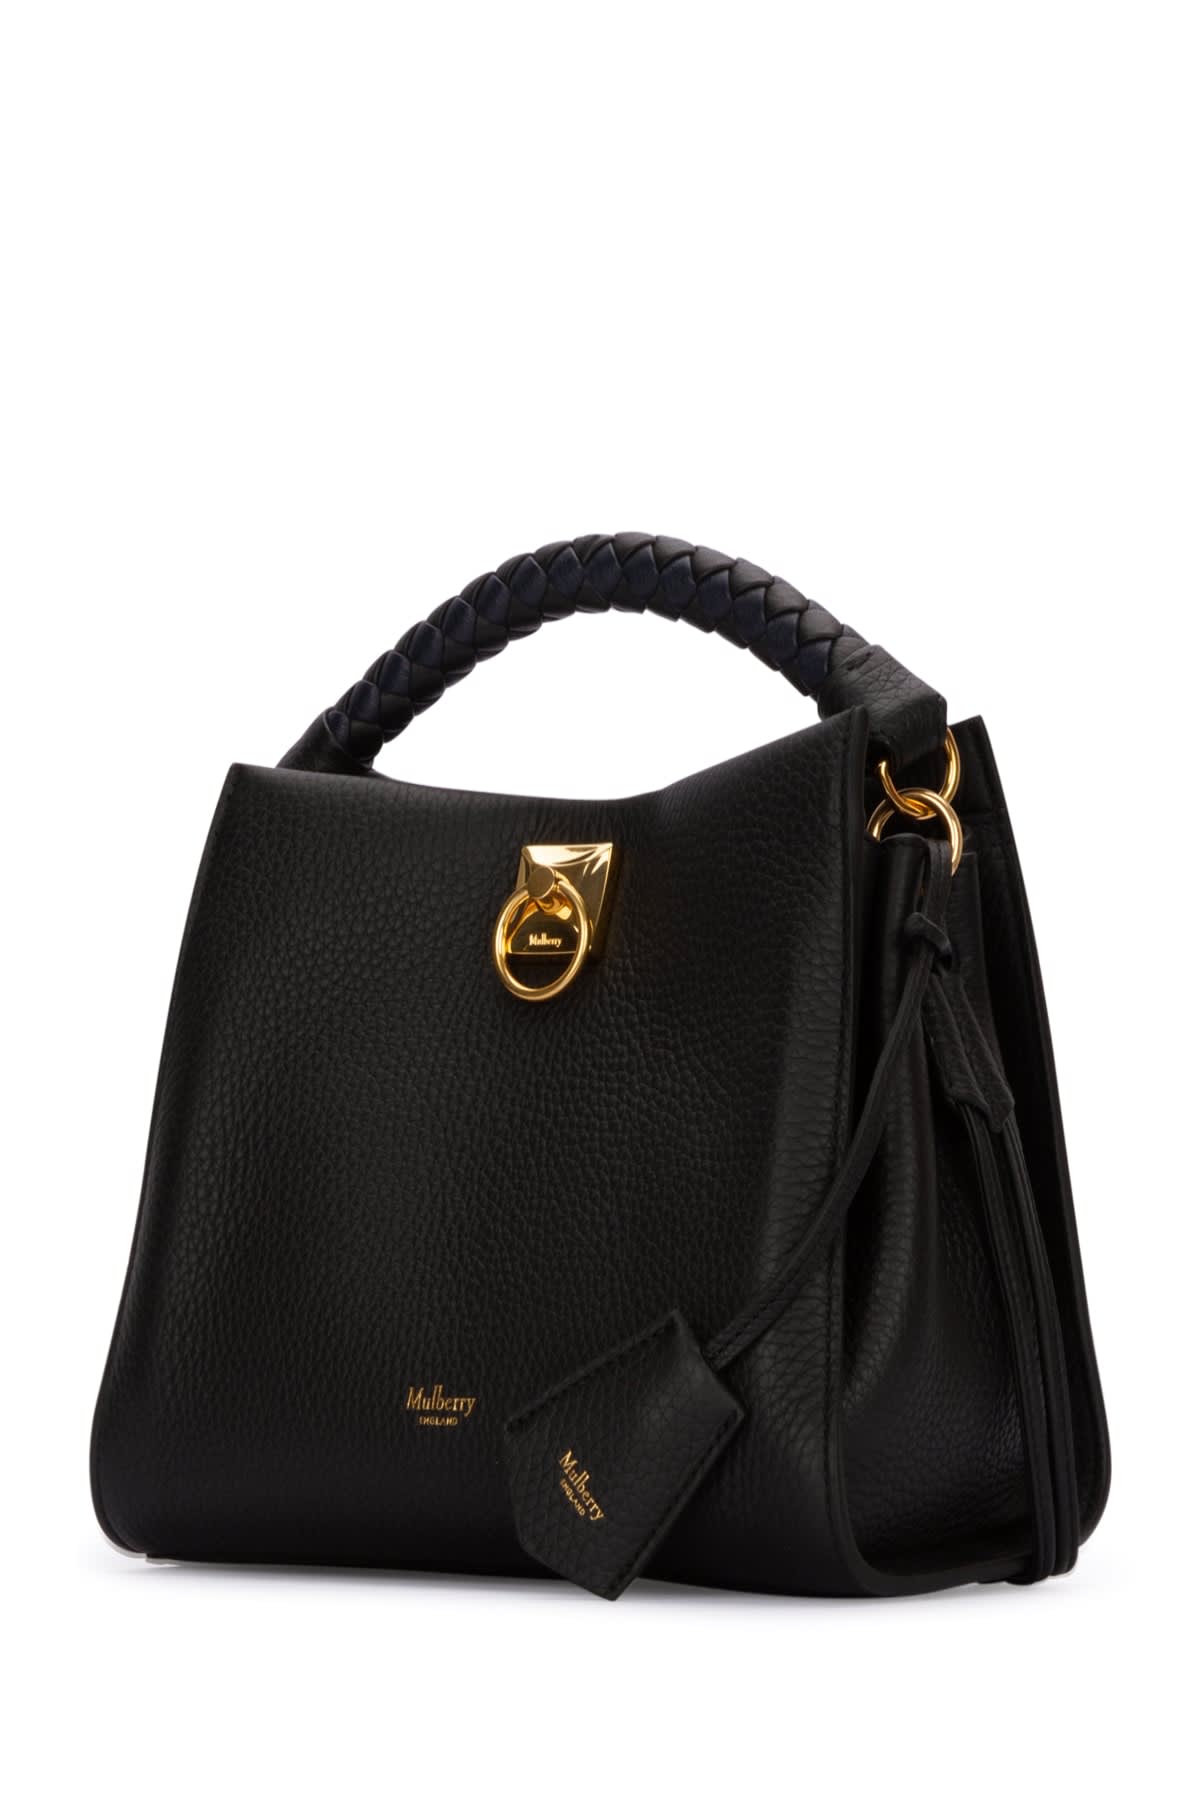 Shop Mulberry Borsa In A100